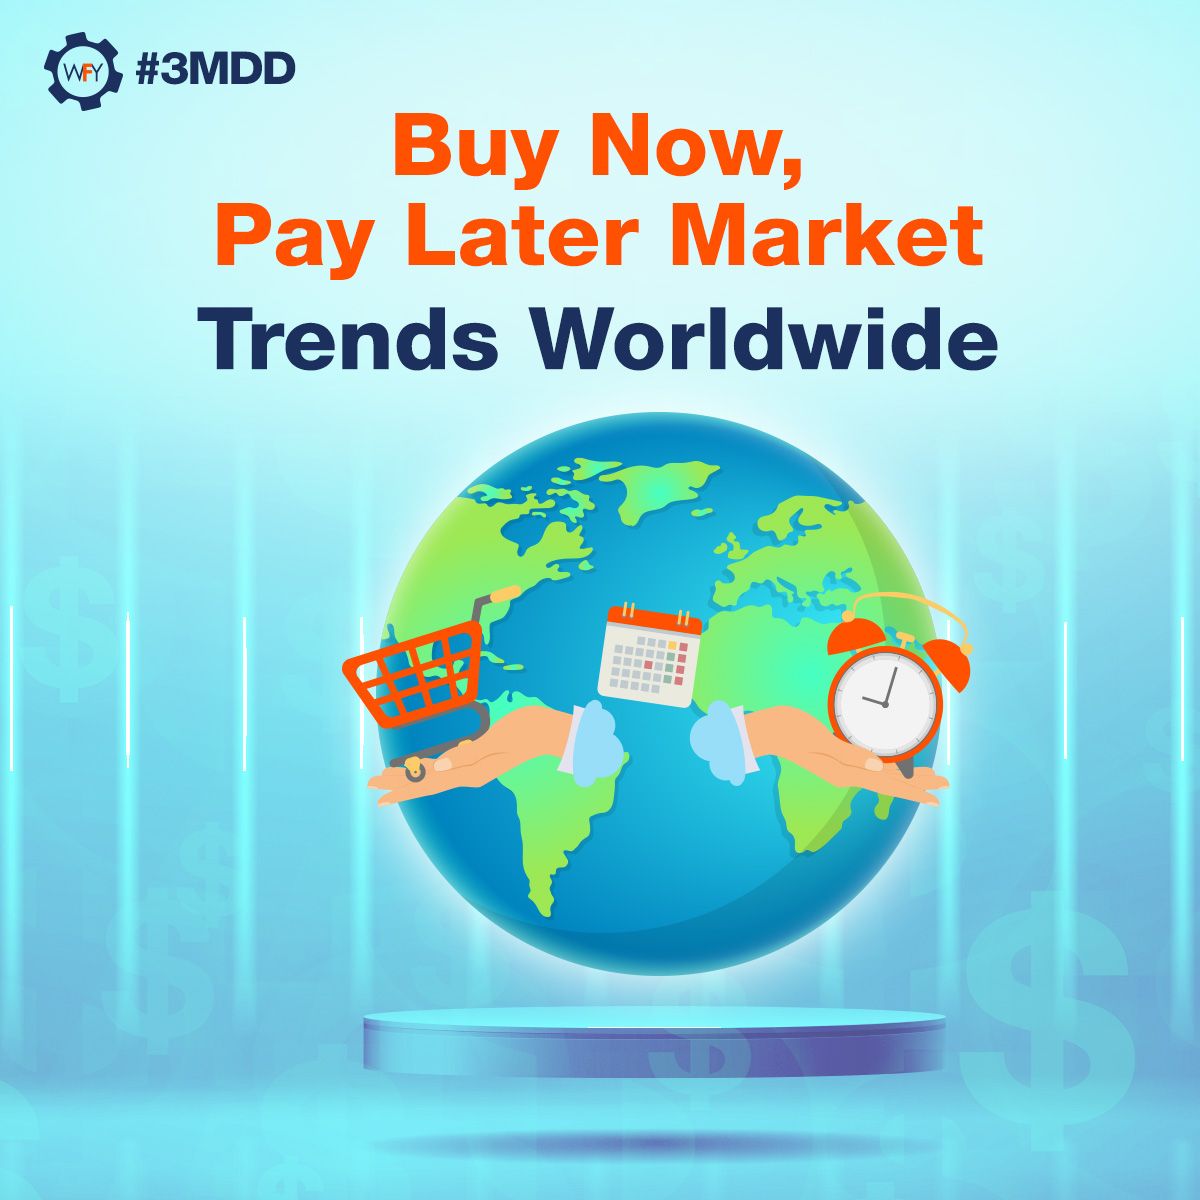 Buy Now, Pay Later Market Trends Worldwide